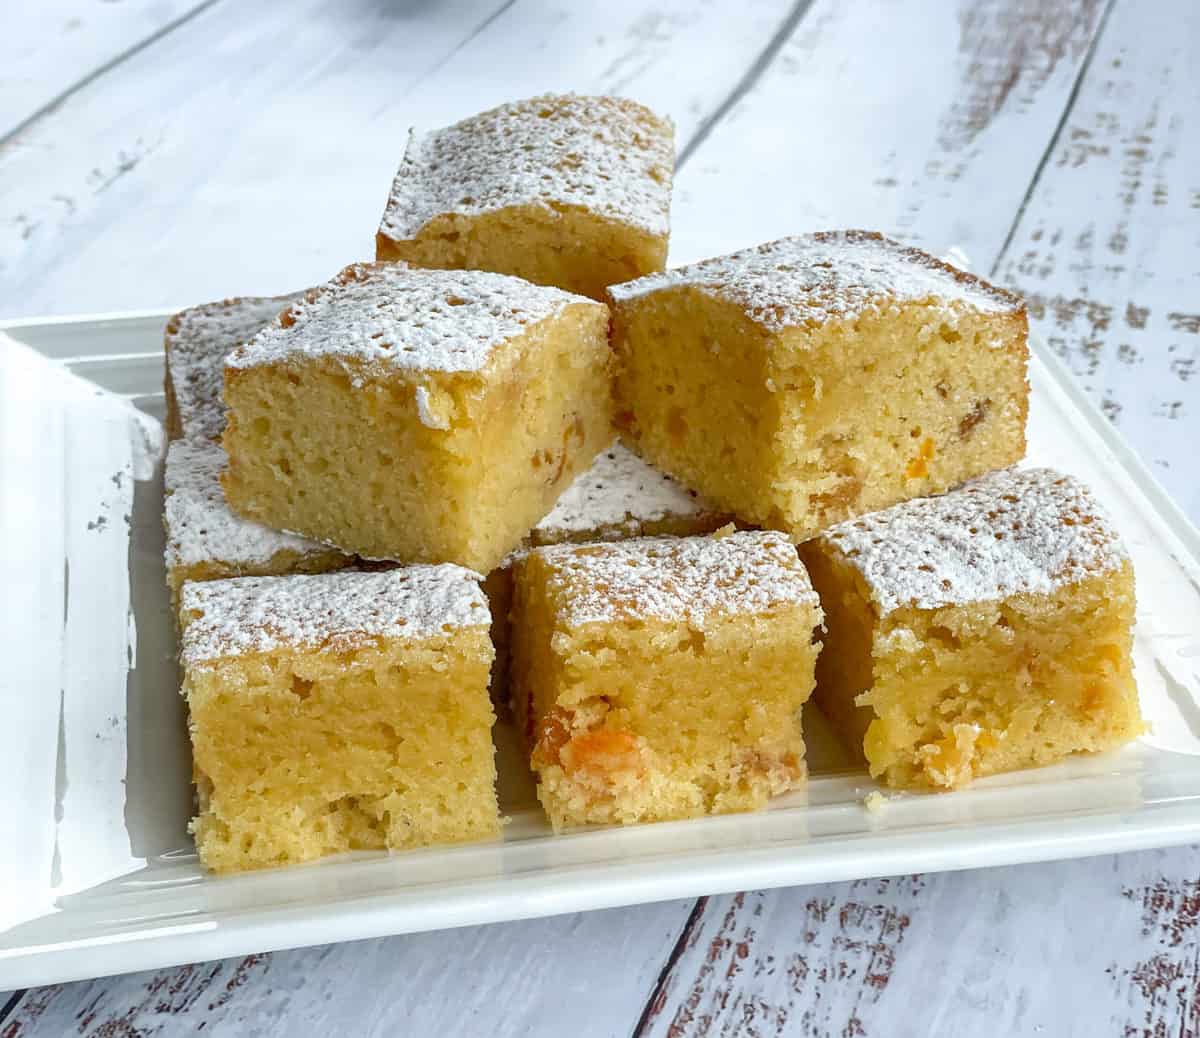 Plate of Apricot and White Chocolate slice on a white background dusted in icing sugar